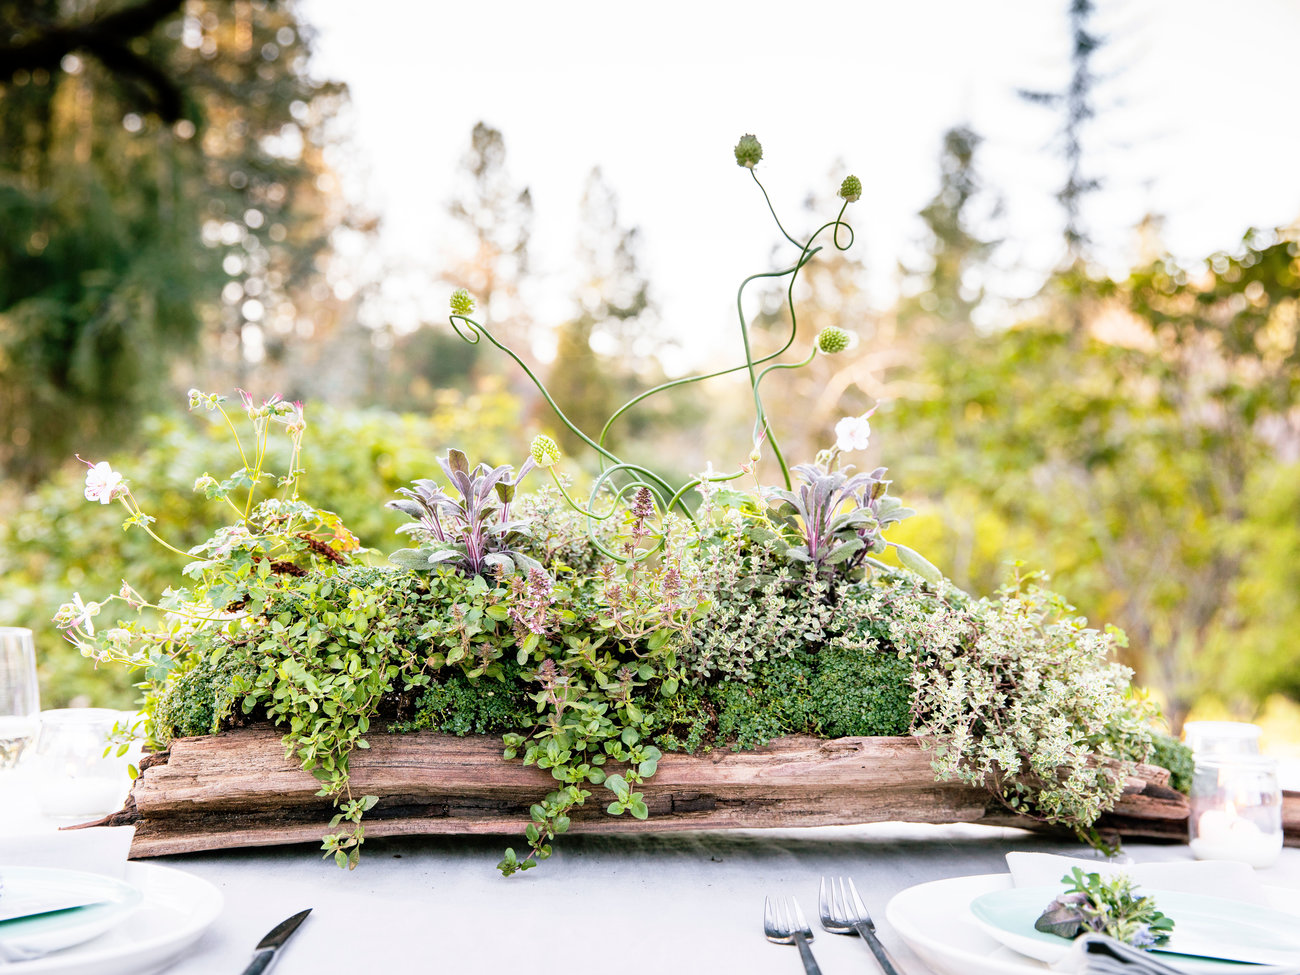 How to Set the Mood for a Chic Garden Party